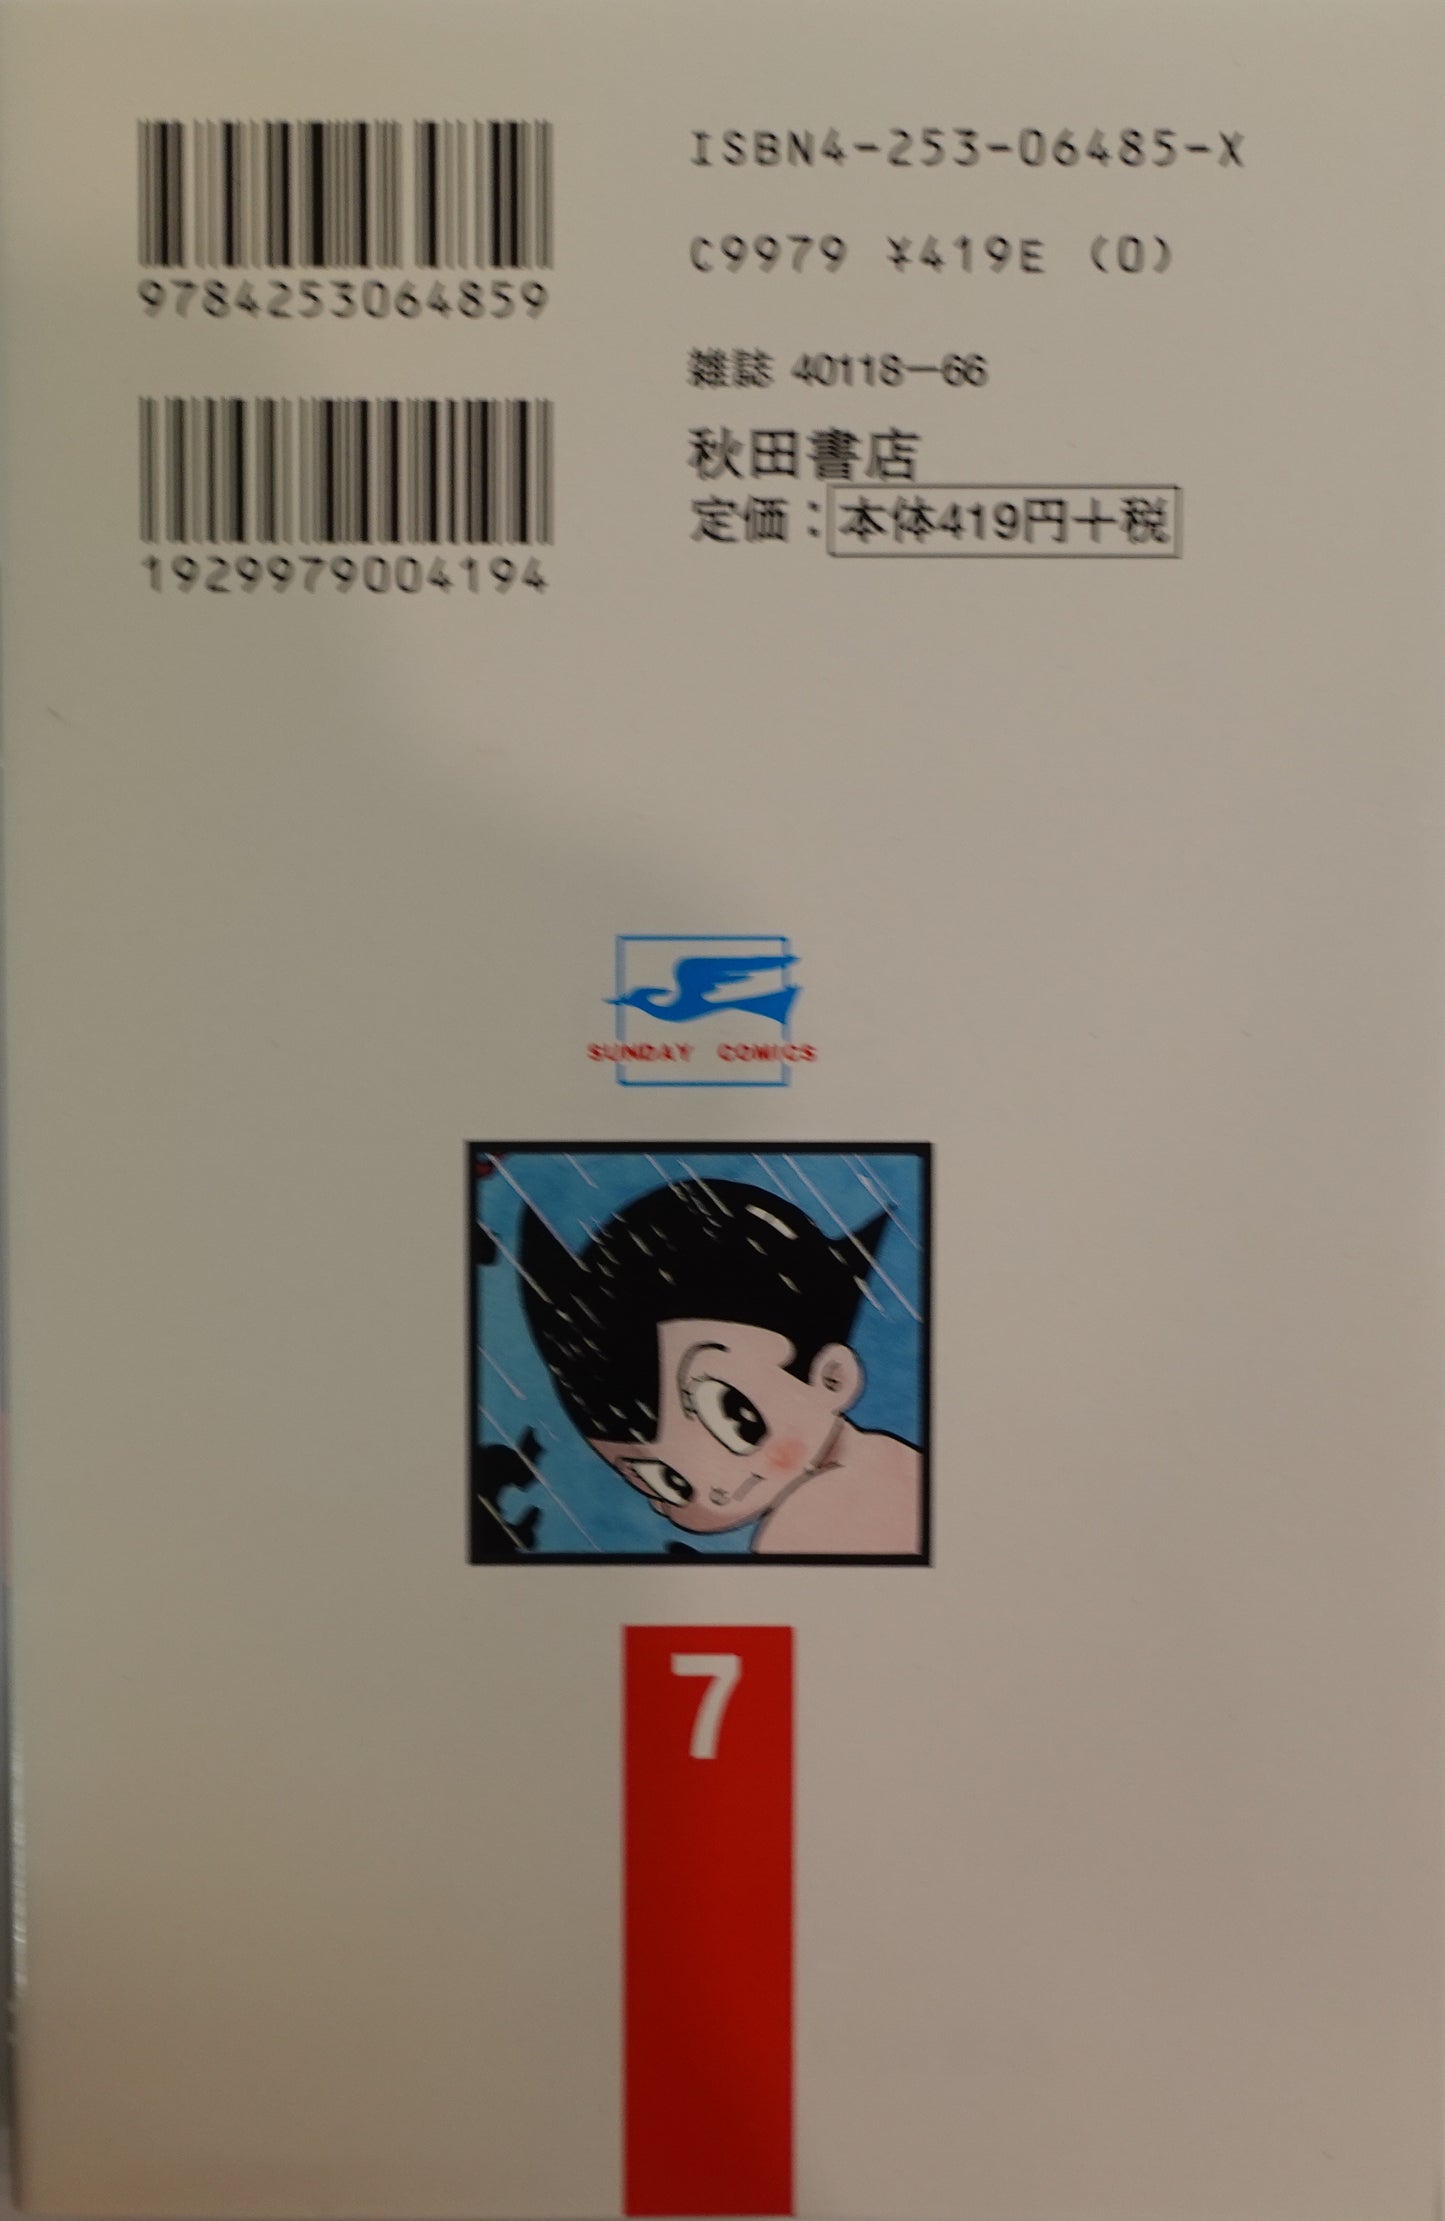 Mighty Atom-Astro boy- Vol.7-official Japanese Edition